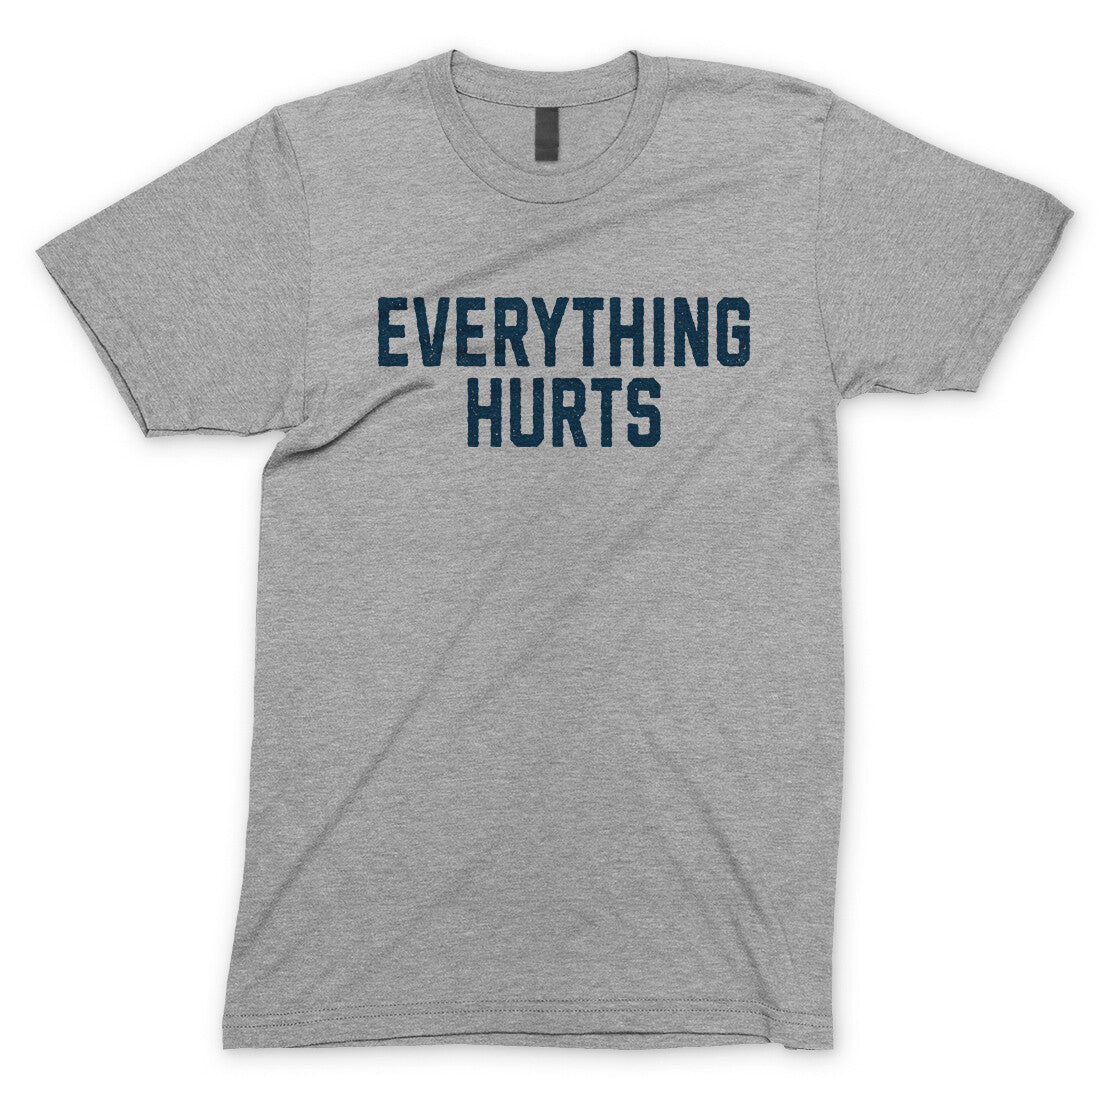 Everything Hurts in Sport Grey Color